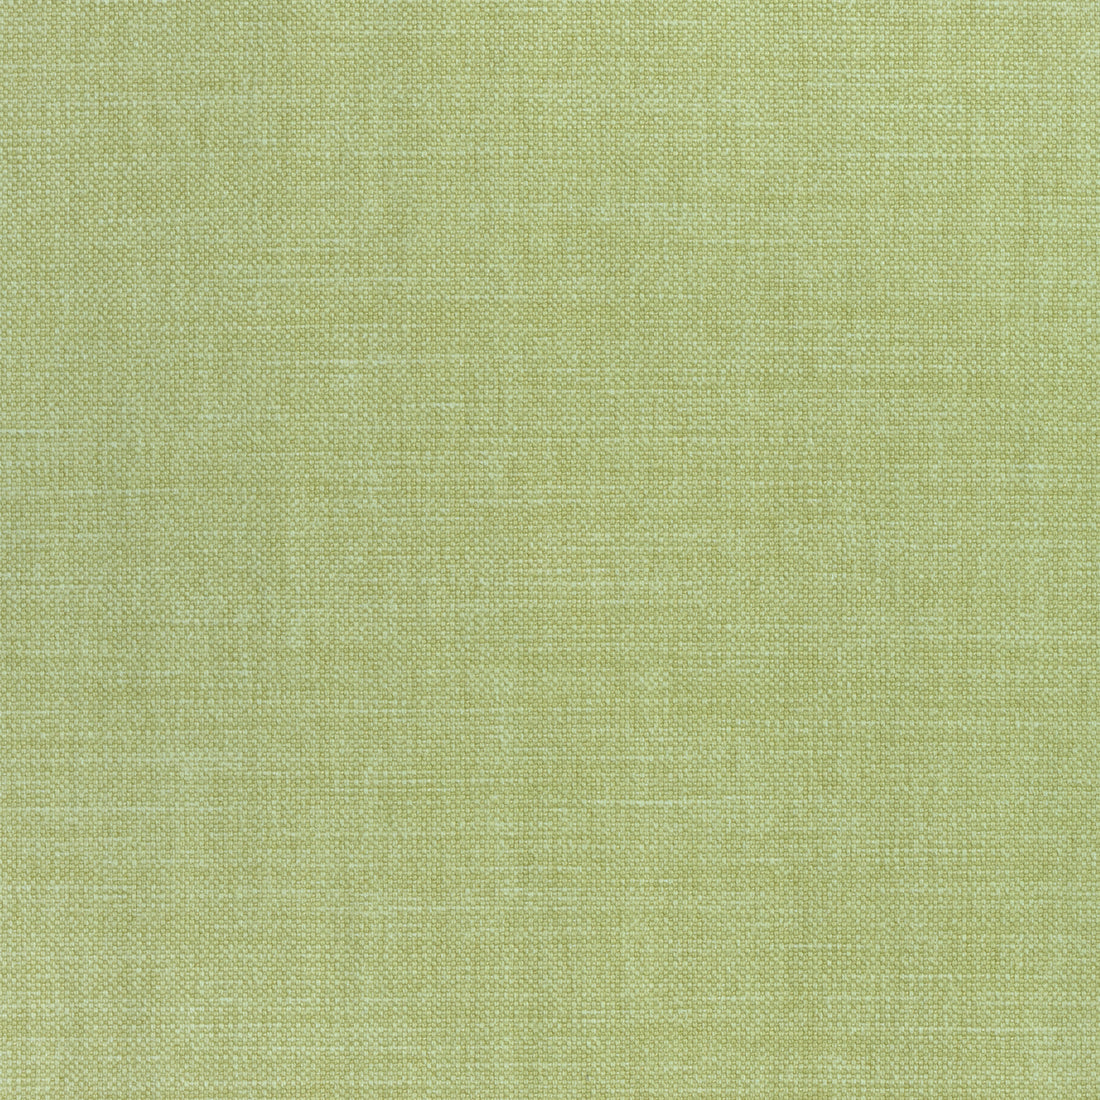 Prisma fabric in lemongrass color - pattern number W70138 - by Thibaut in the Woven Resource Vol 12 Prisma Fabrics collection